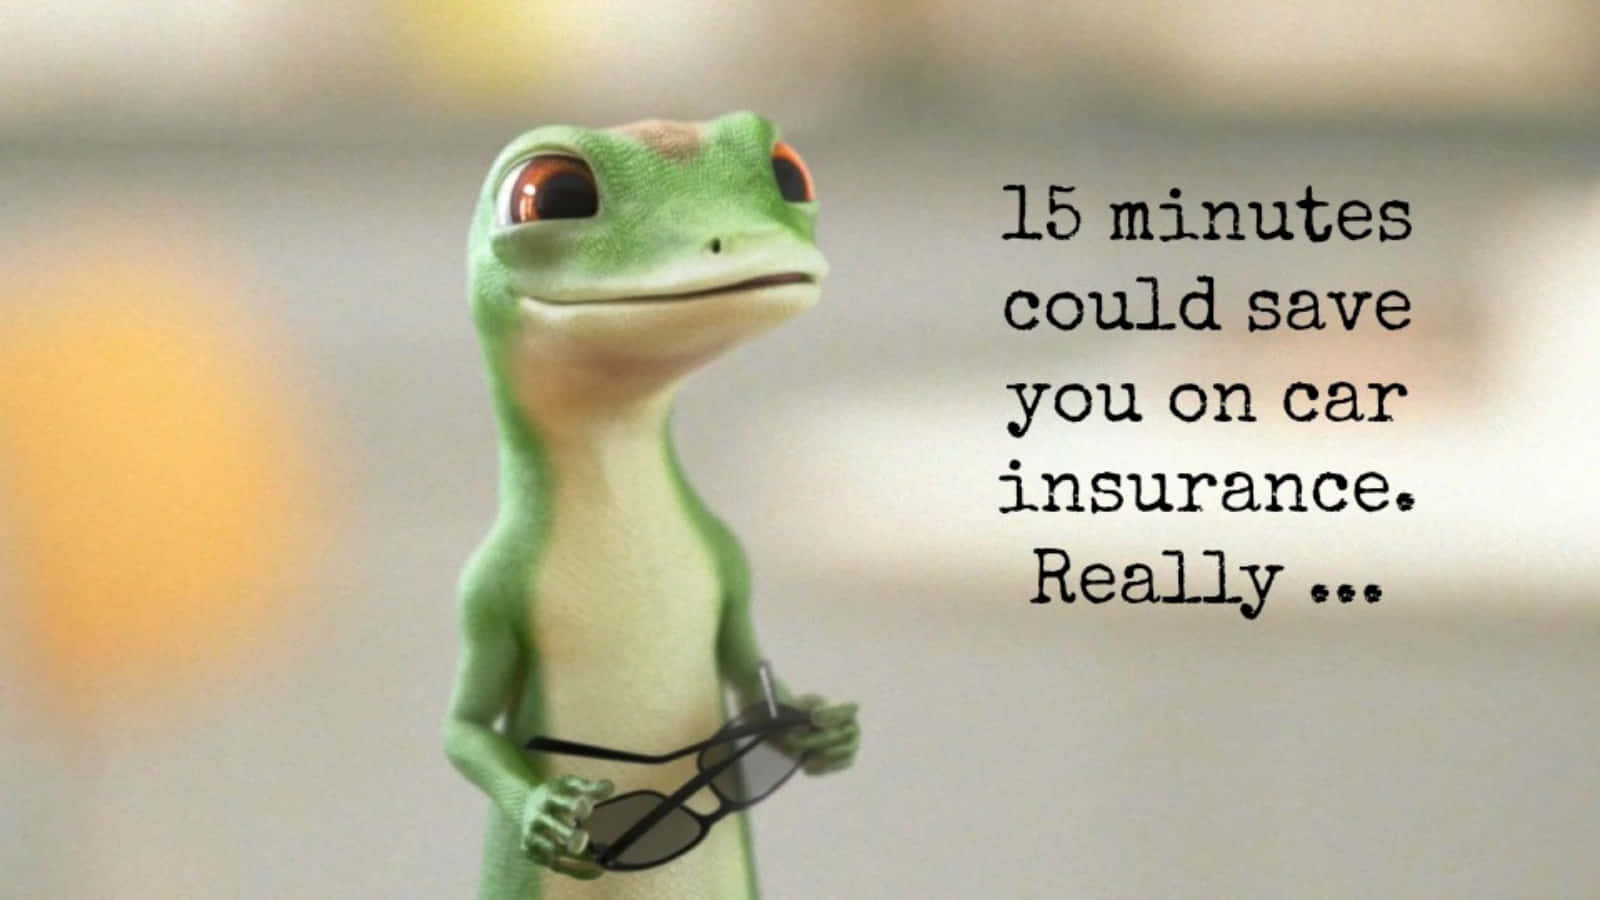 Choose Geico for your car insurance!